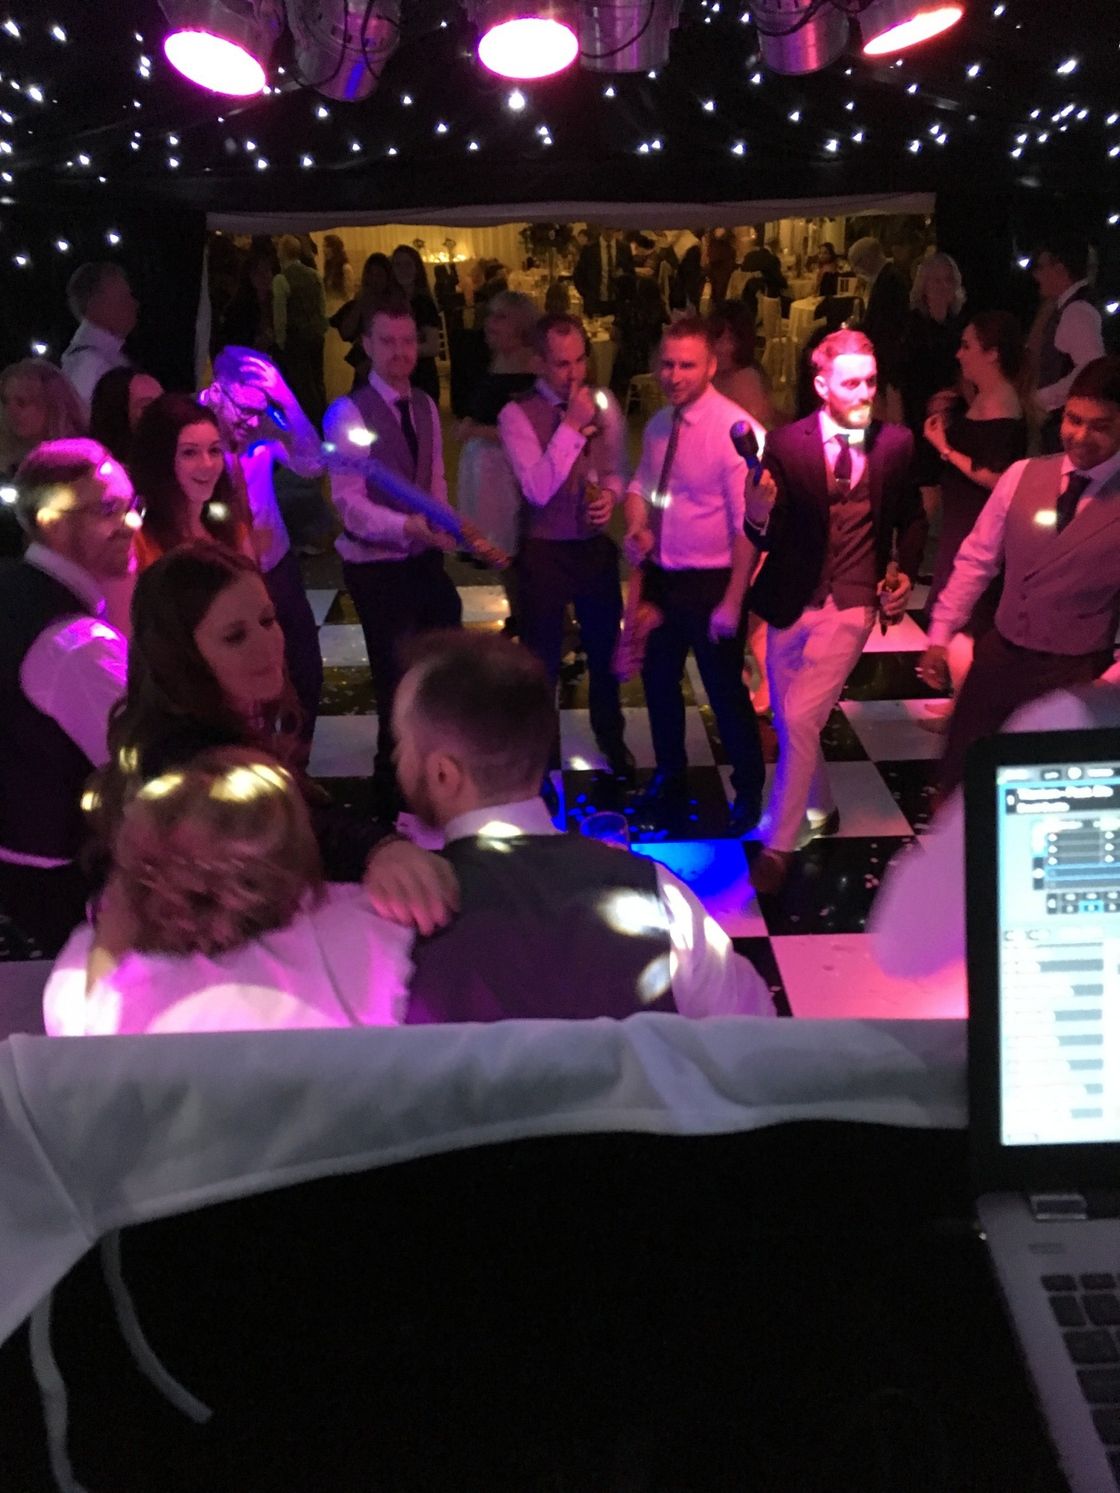 view from the DJ console of the dance floor with bride and groom dancing